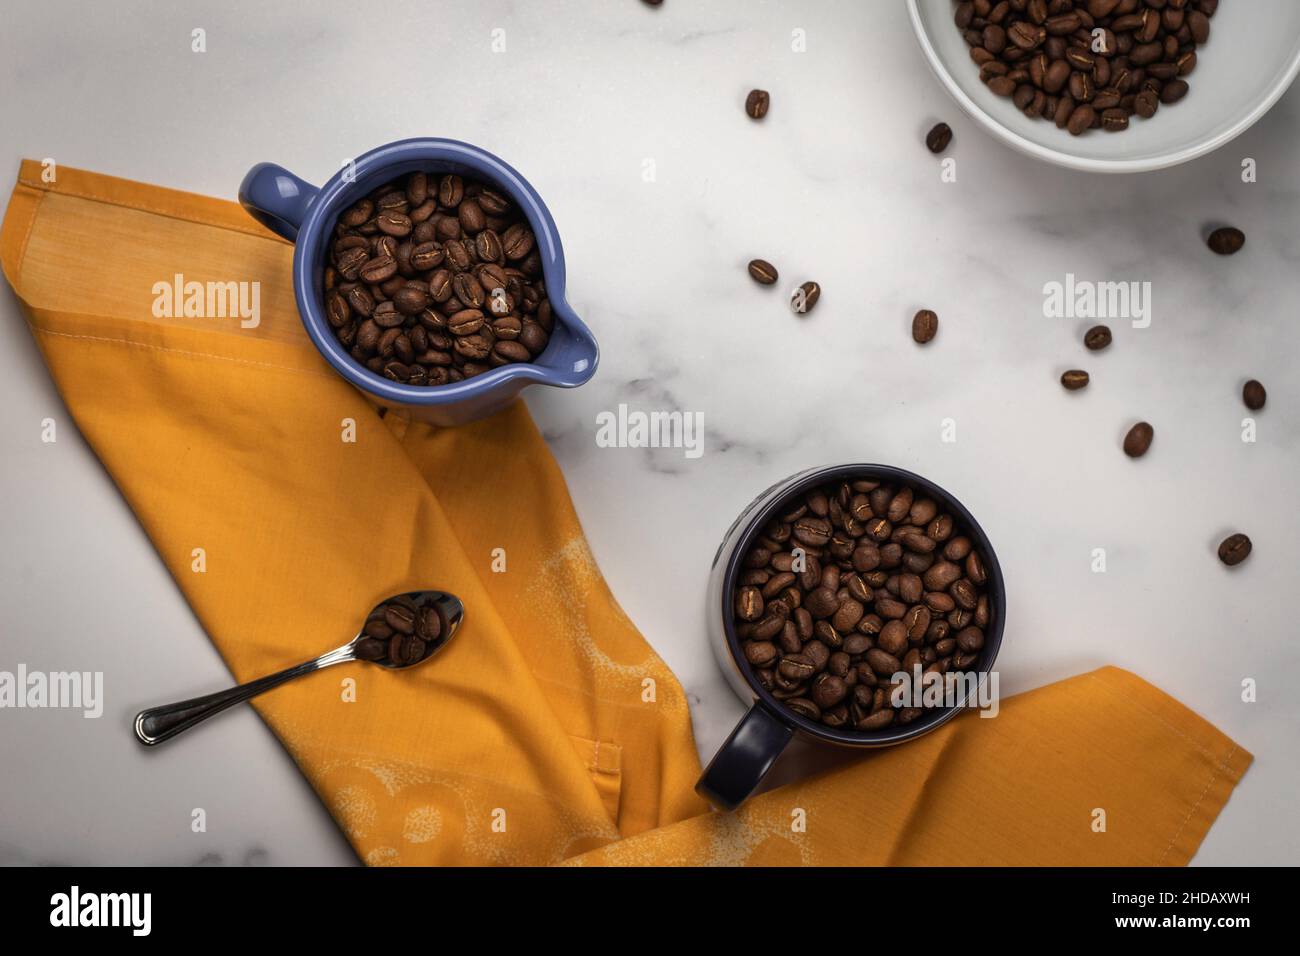 Top view of a messy kitchen table with bowls of coffee beans Stock Photo